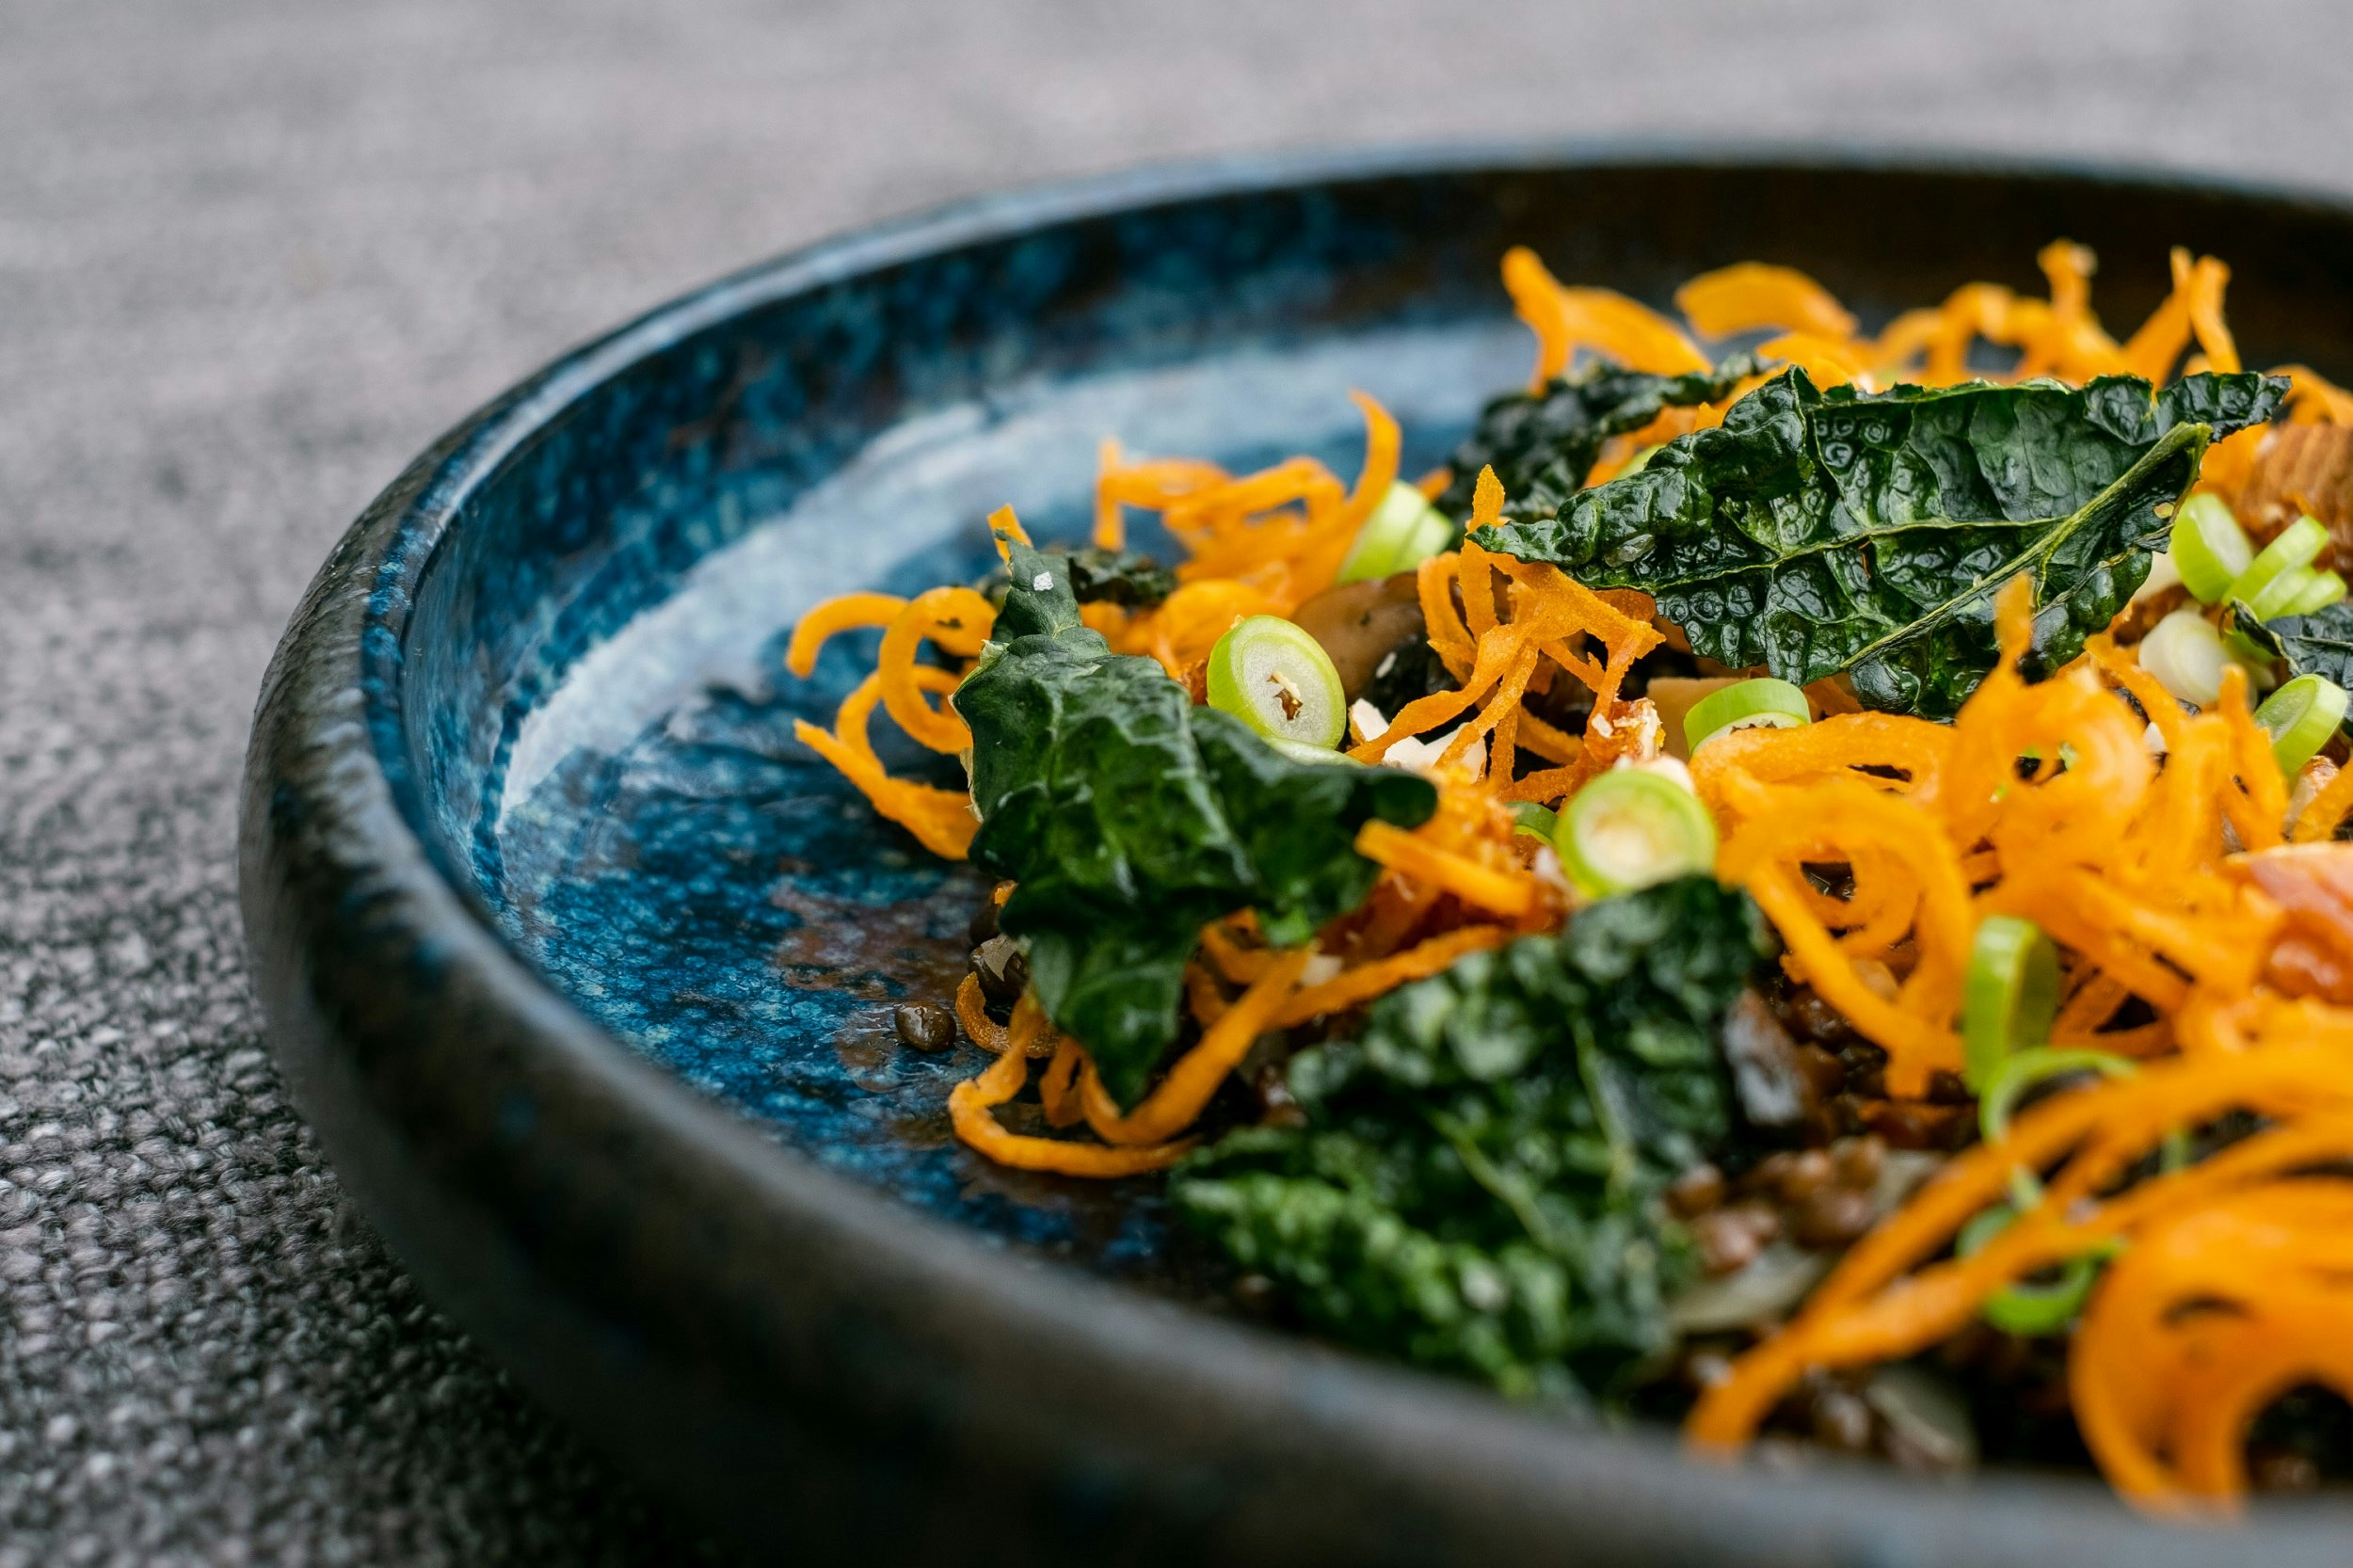 A bowl of kale, swirled carrot and green onions